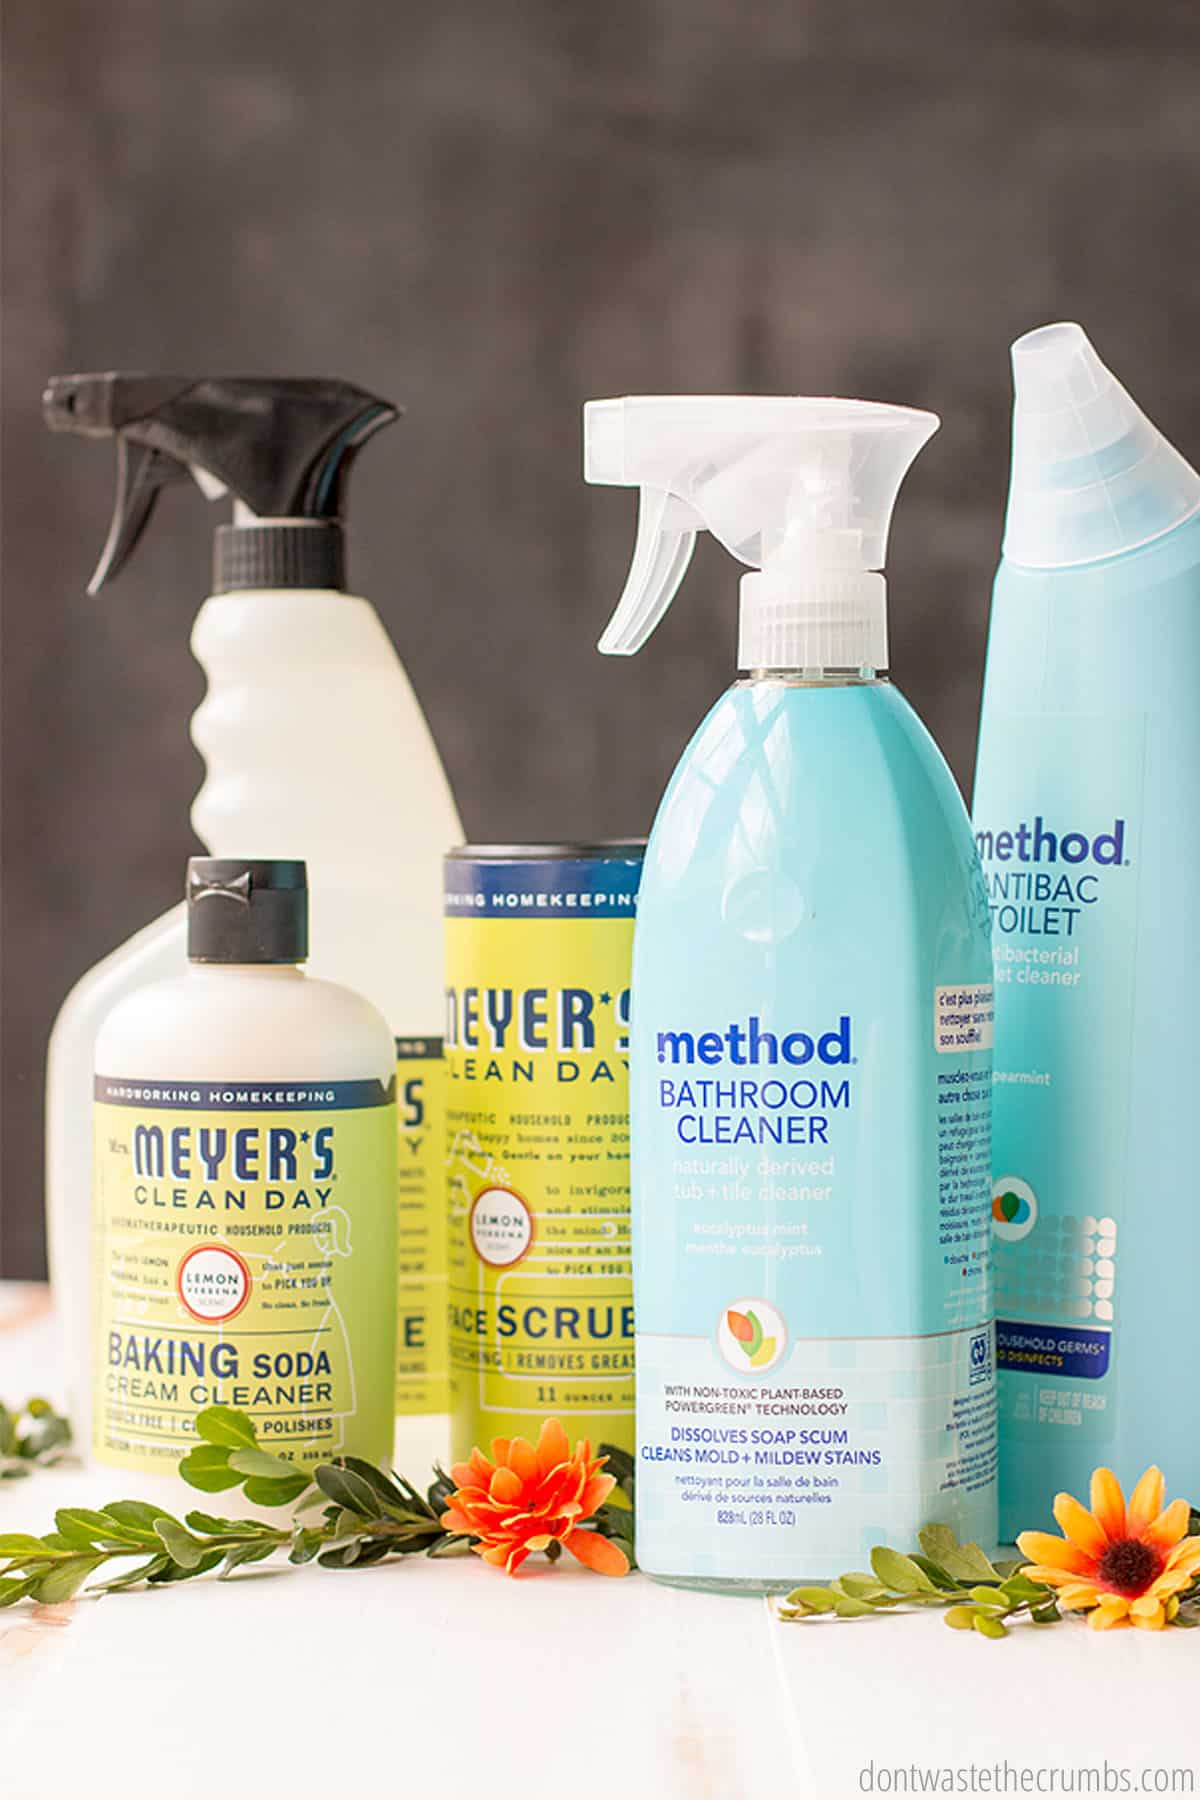 Pictured are five products that can be purchased at Grove Collaborative. A bathroom cleaner, baking soda cream cleaner, scrub cleaner and toilet cleaner. Flowers are placed on the table beside the cleaning products.